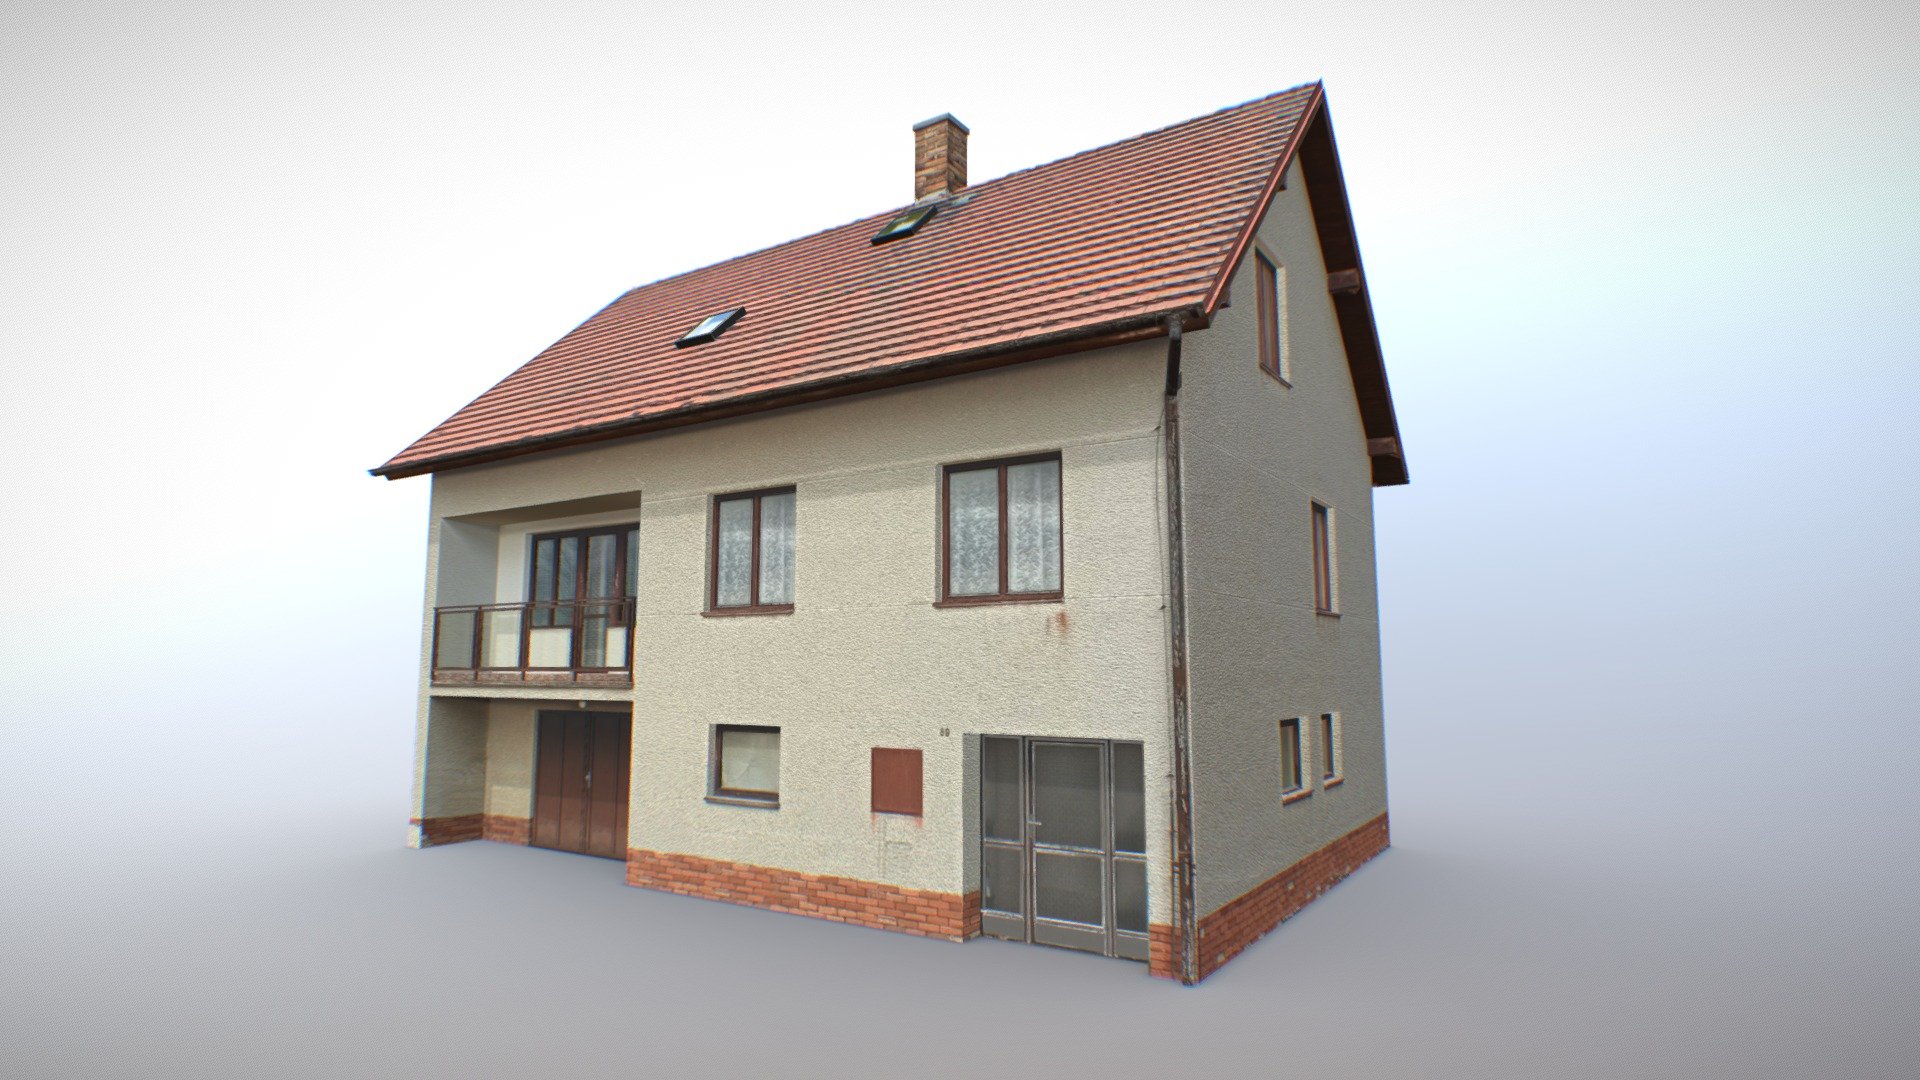 Its a village family house from europe. Exterior only. Textures made from actual photos 3d model